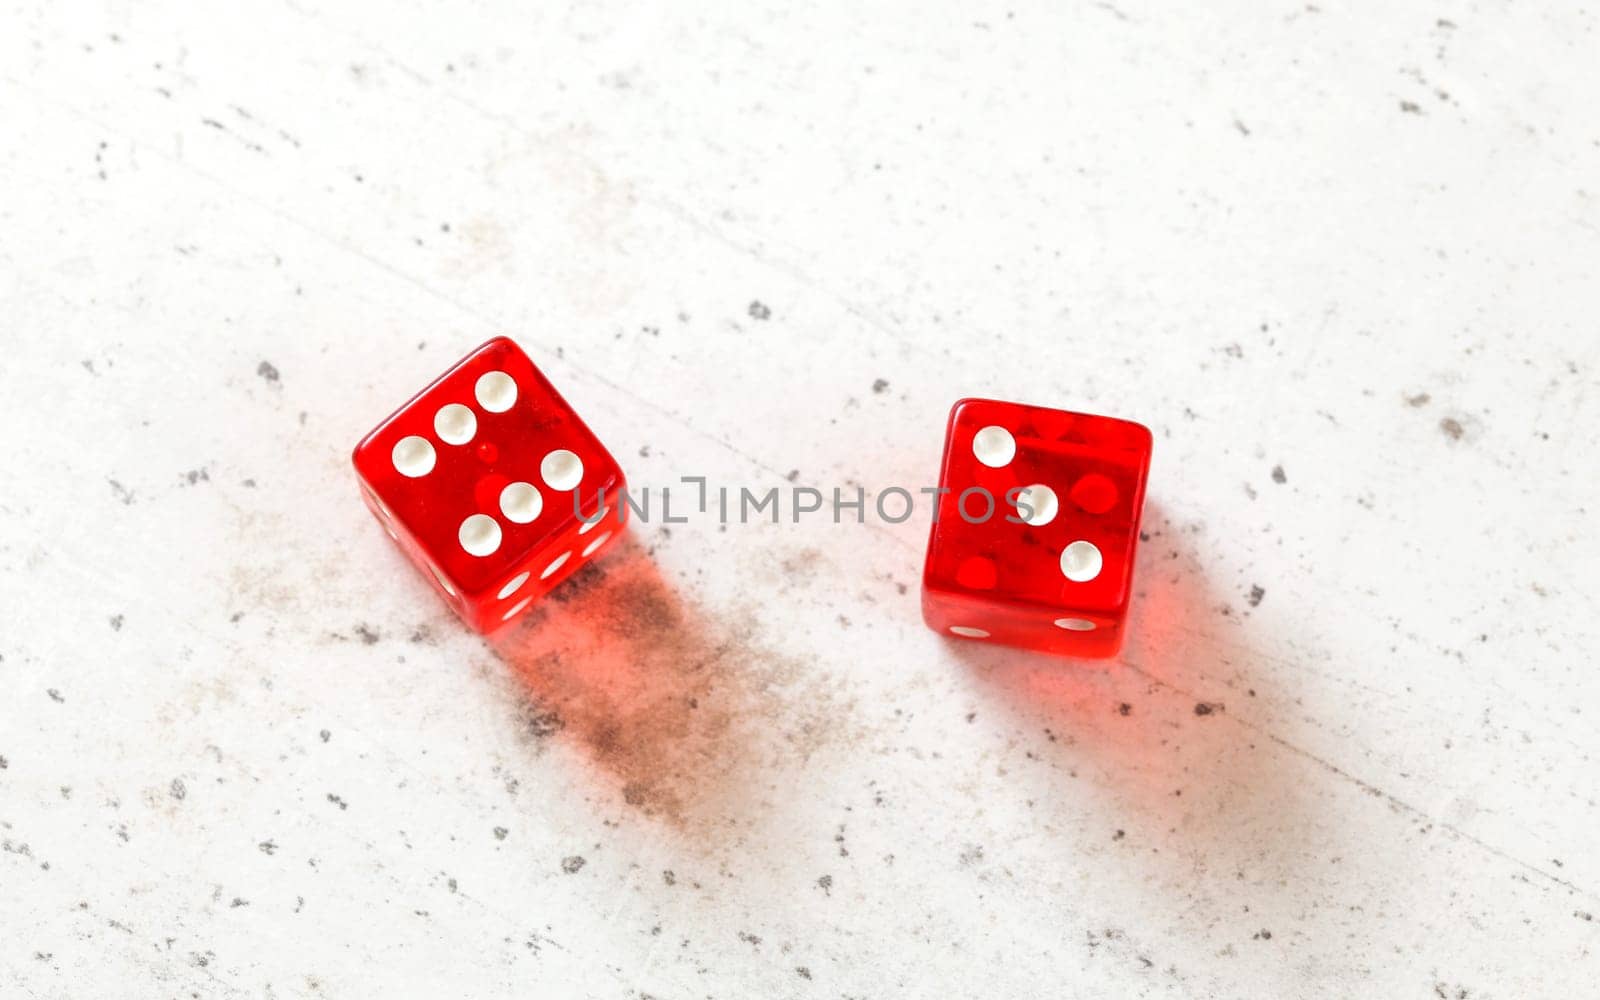 Two red craps dices showing Centerfield Nine (Nina) (number 6 and 3) overhead shot on white board by Ivanko